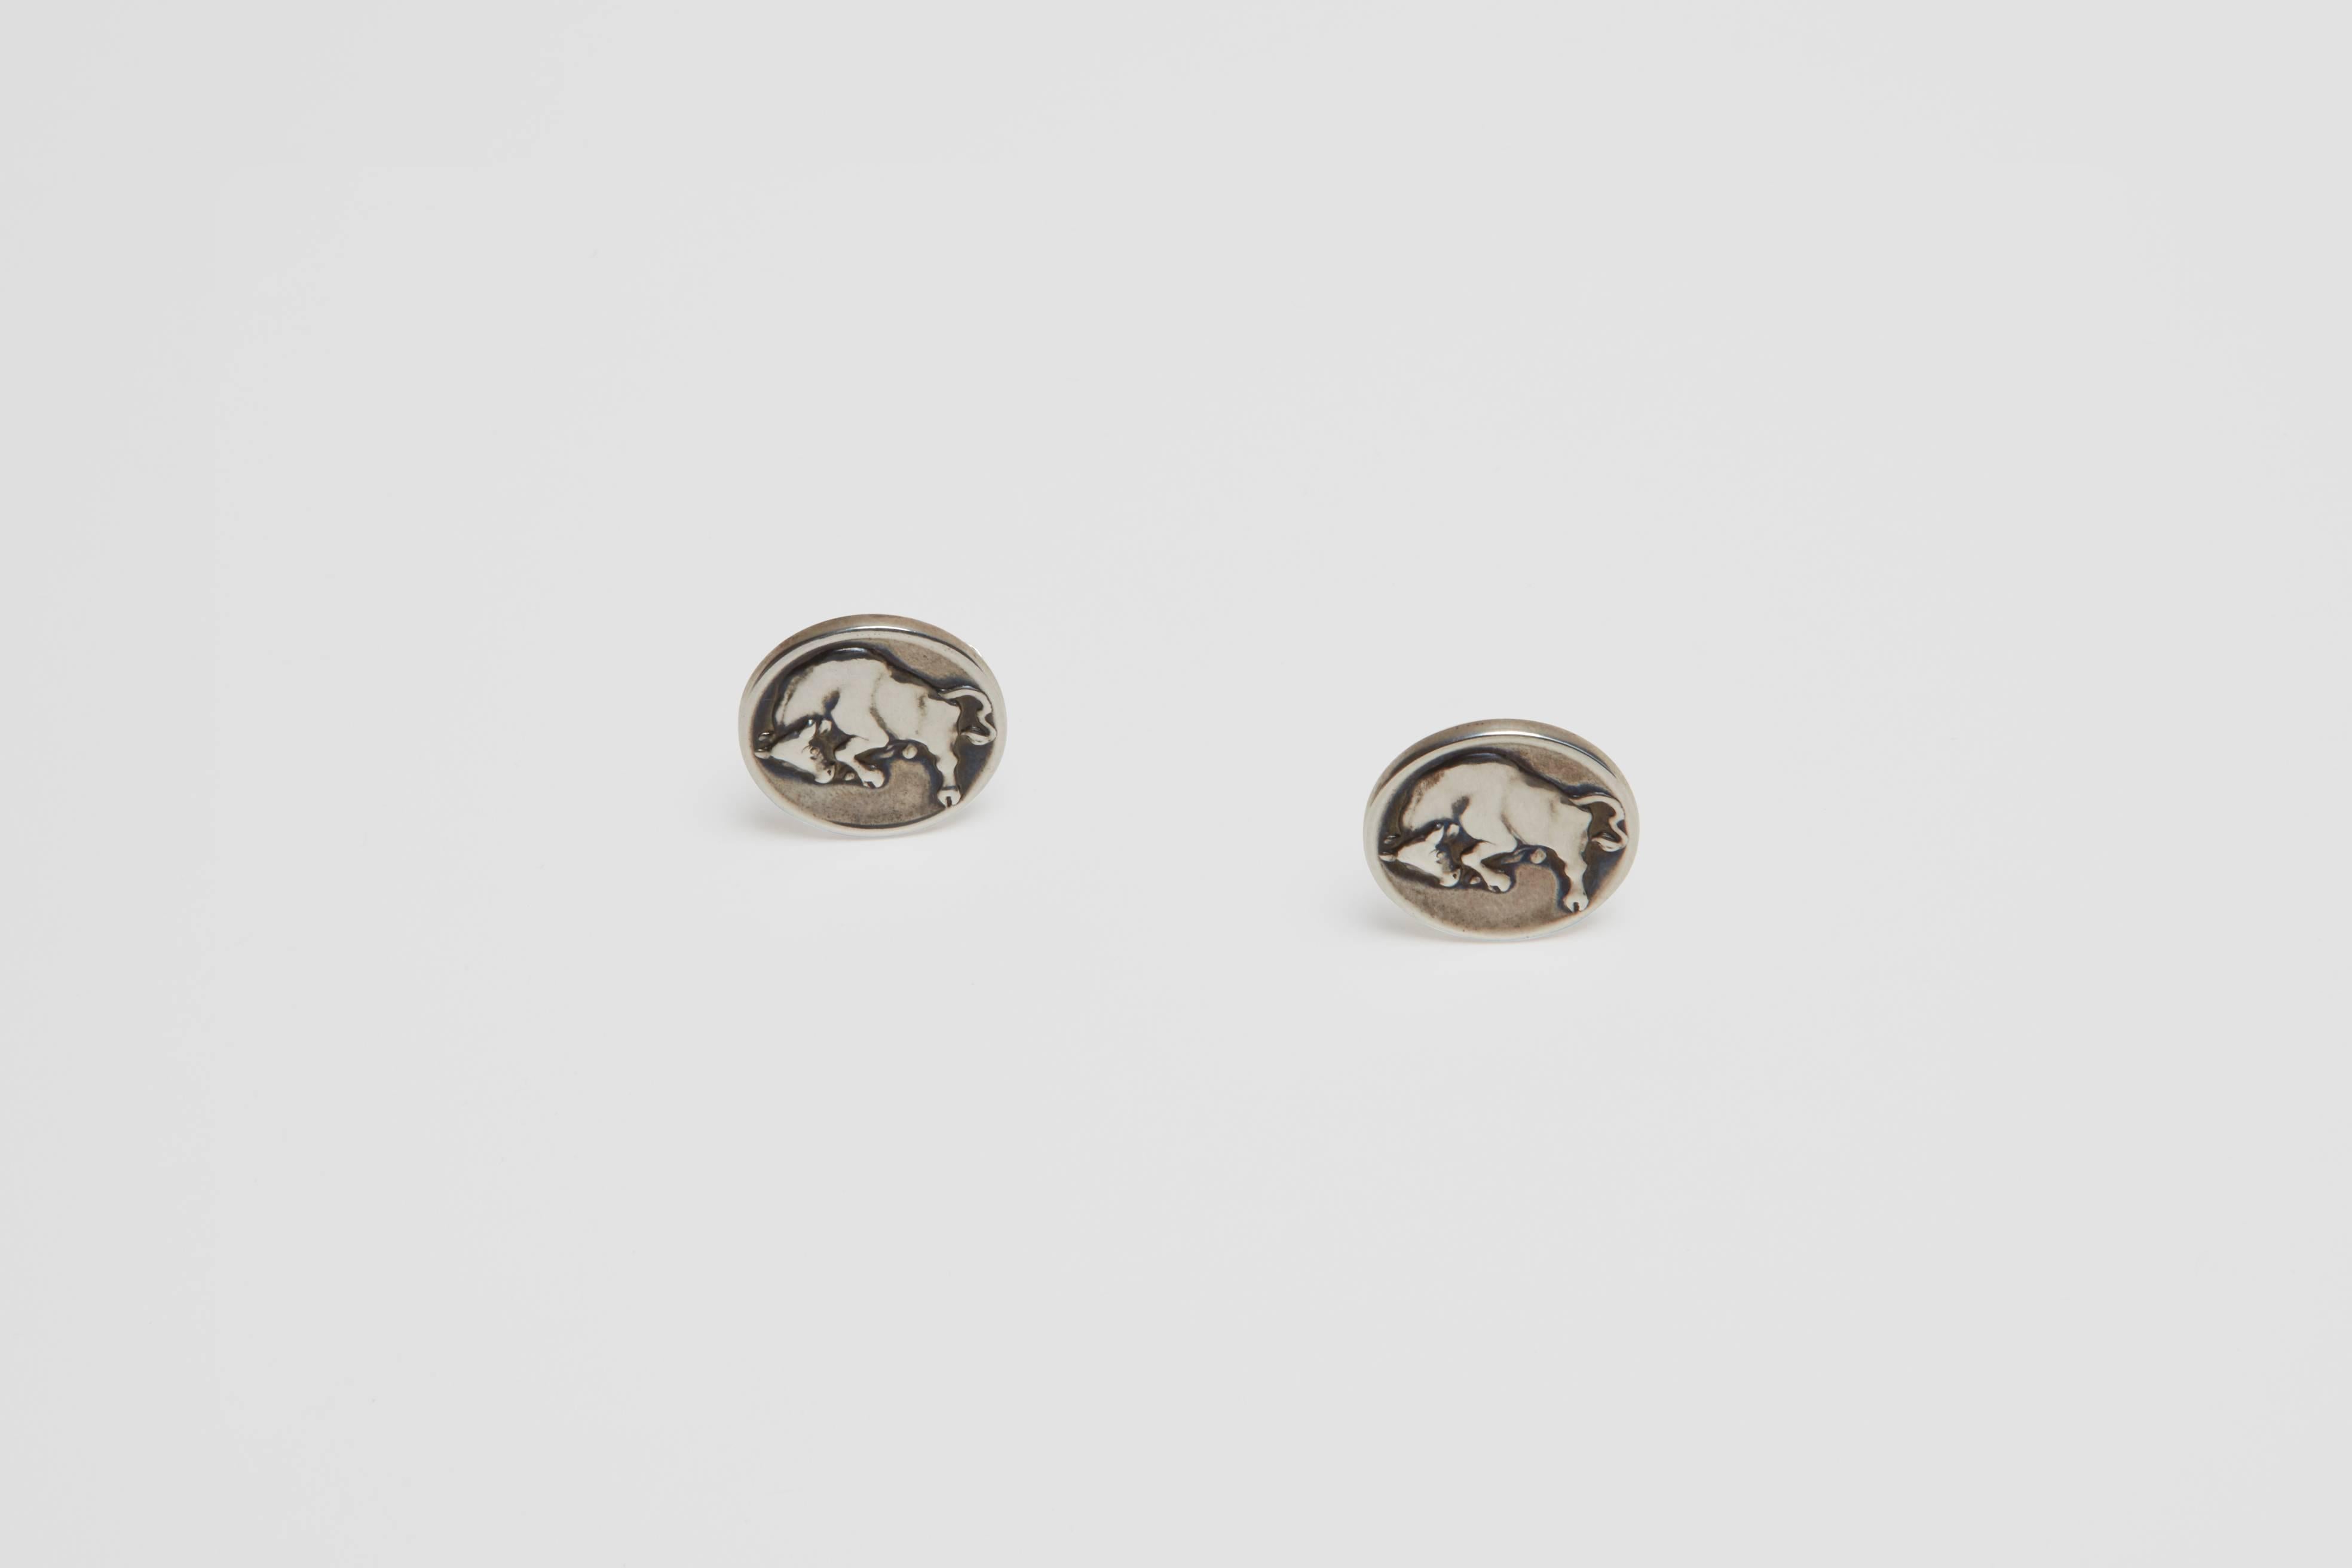 A pair of sterling silver cufflinks featuring a charging bull made in Denmark by Georg Jensen. This pair of cufflinks has the design attribution by Arno Malinowski. Malinowski was a silver designer, a sculptor, ceramist, engraver and medalist. He